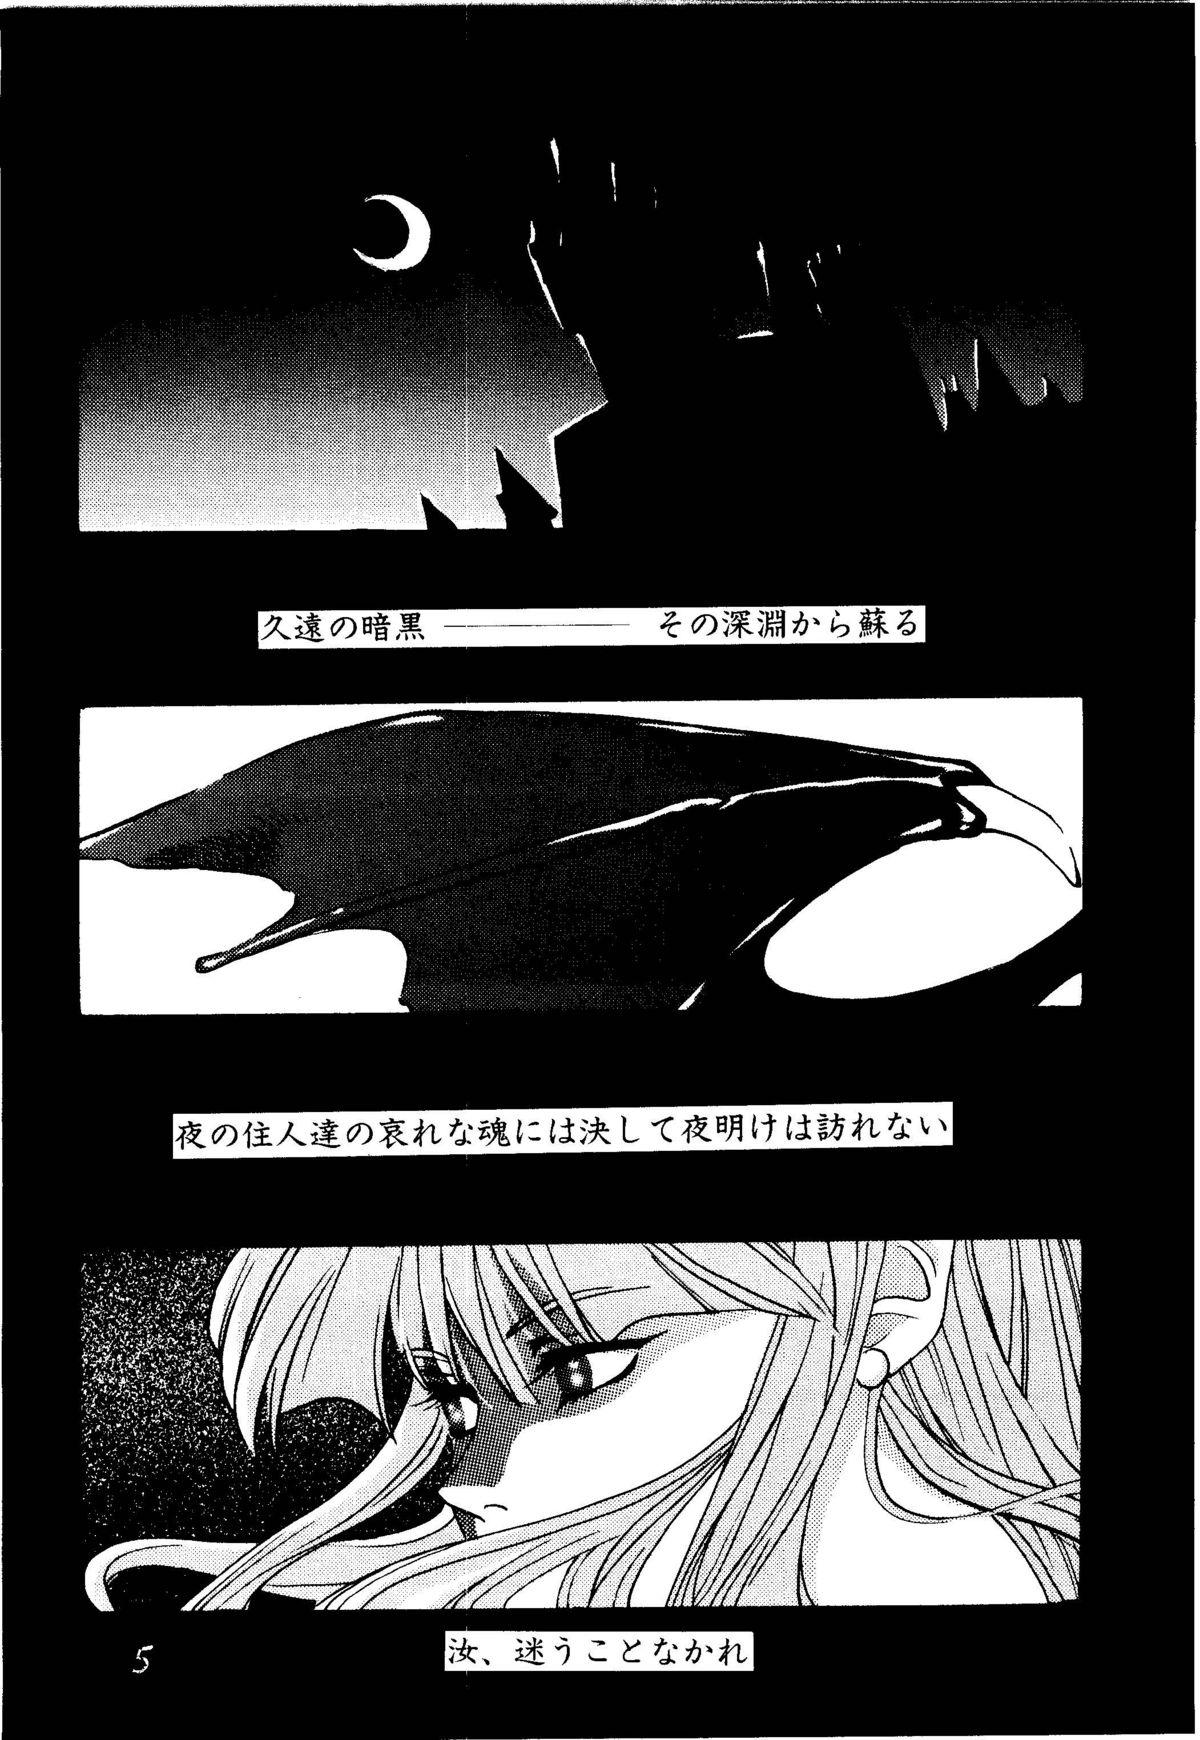 Hard Cock Fire and Ice - Darkstalkers Hogtied - Page 5